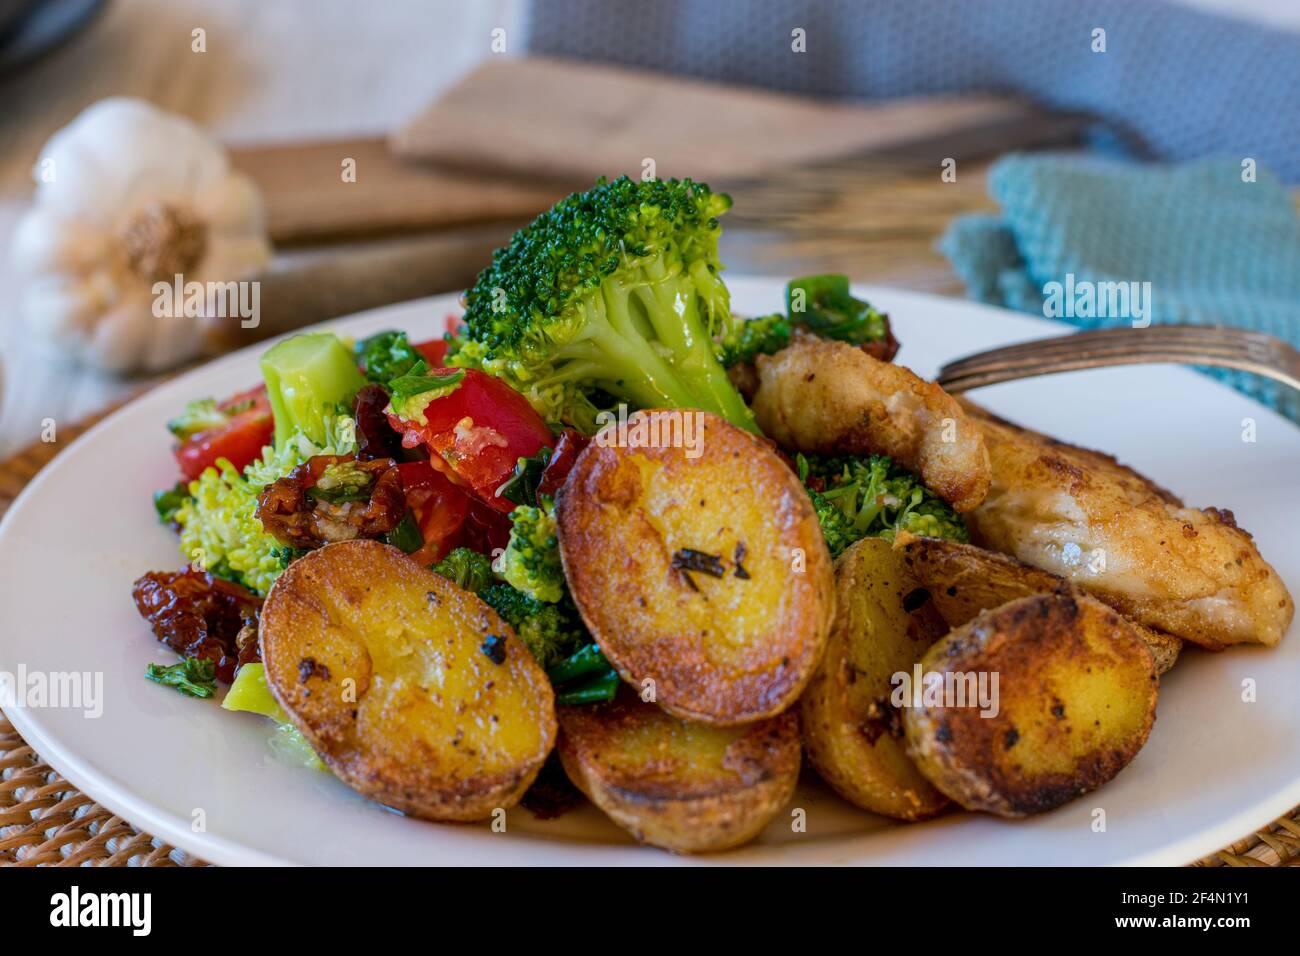 mediterranean broccoli salad and roasted rosemary potatoes served as a side dish on a plate with fried fish Stock Photo